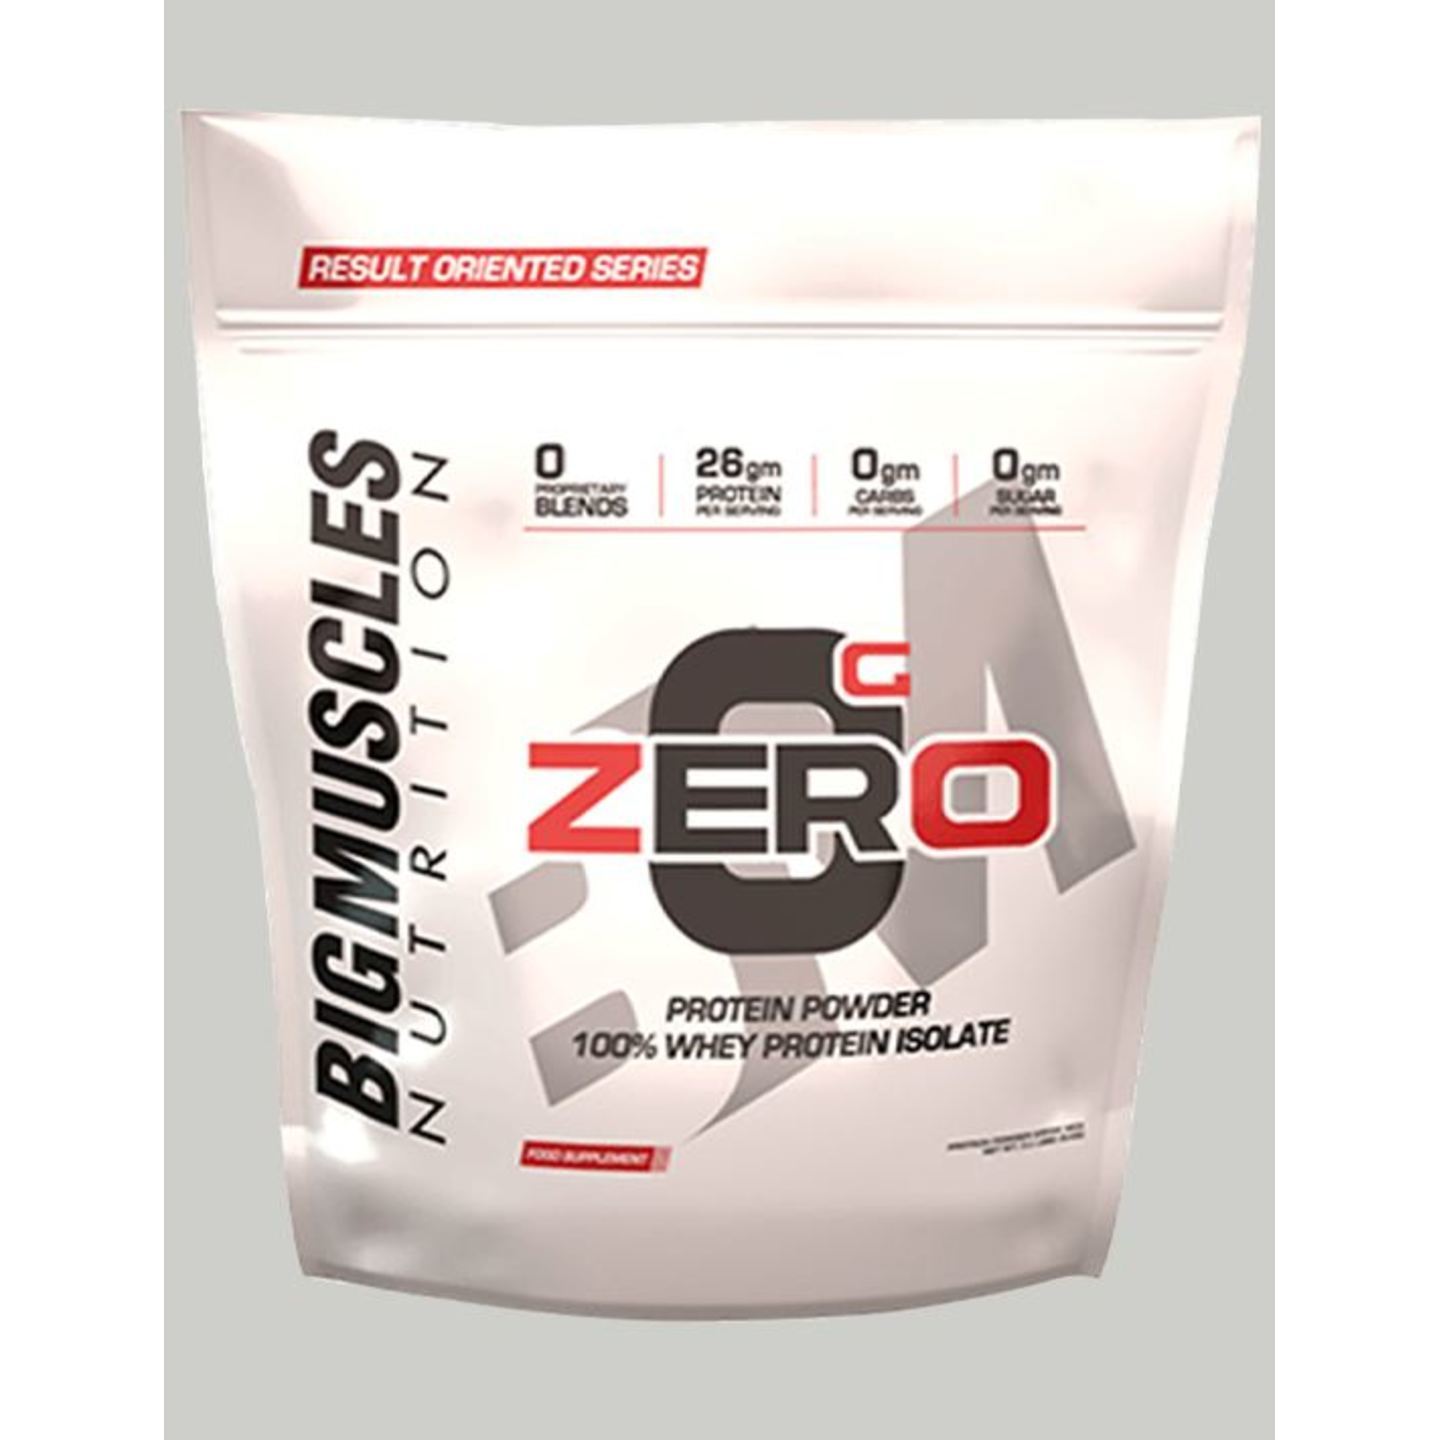 MastMart Bigmuscles Nutrition ZERO Protein Powder from 100 Whey Isolate Strawberry &amp Banana Twirl 9 lbs